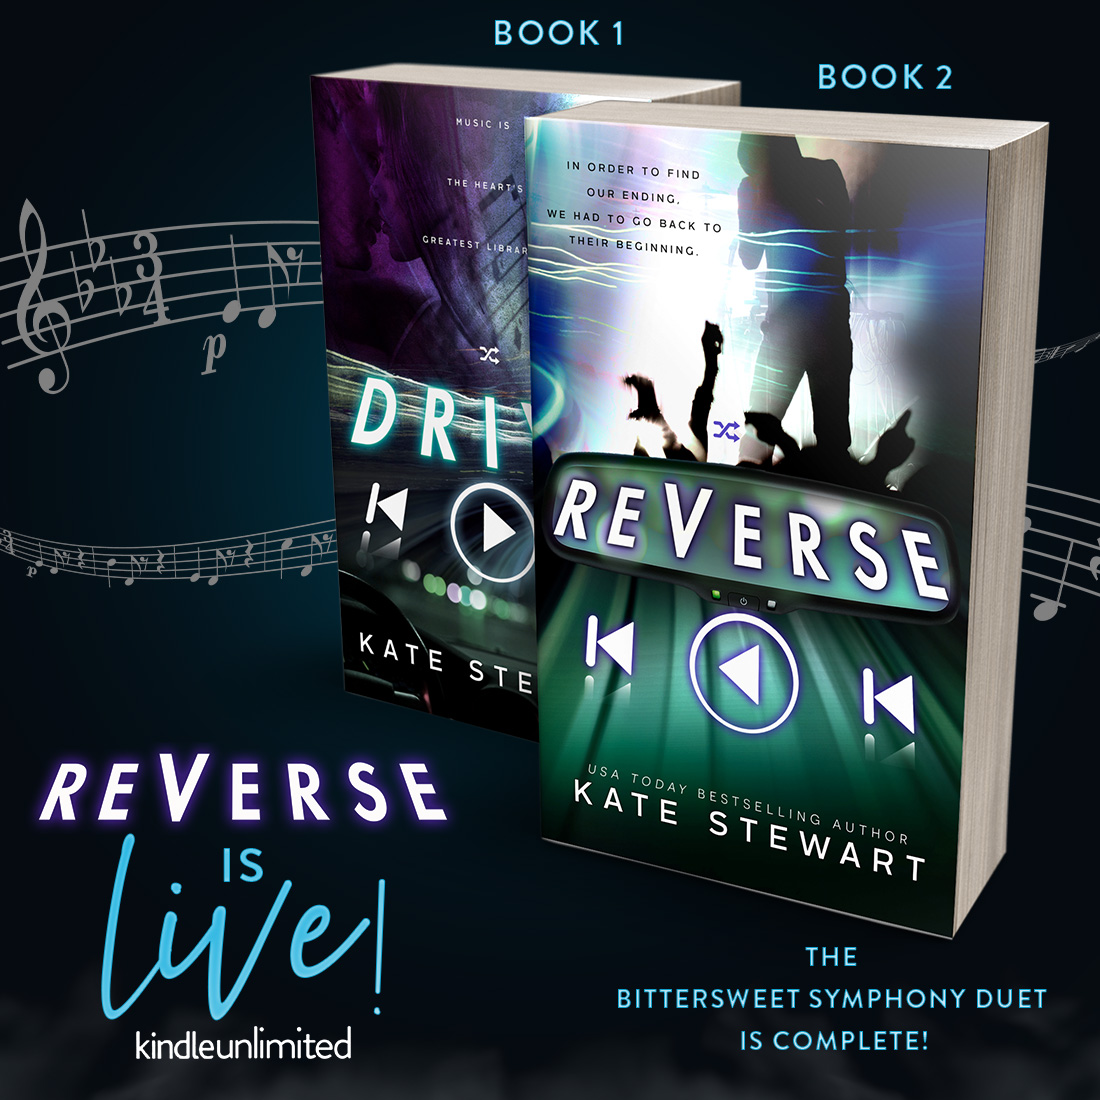 𝐑𝐄𝐕𝐄𝐑𝐒𝐄 by USA Today Bestselling author Kate Stewart is LIVE! This is a steamy, star-crossed lovers, rockstar romance with all the feels! Grab book #1 𝐃𝐑𝐈𝐕𝐄 here: buff.ly/3axrk6z Grab book #2 𝐑𝐄𝐕𝐄𝐑𝐒𝐄 here: buff.ly/3yNNc6i